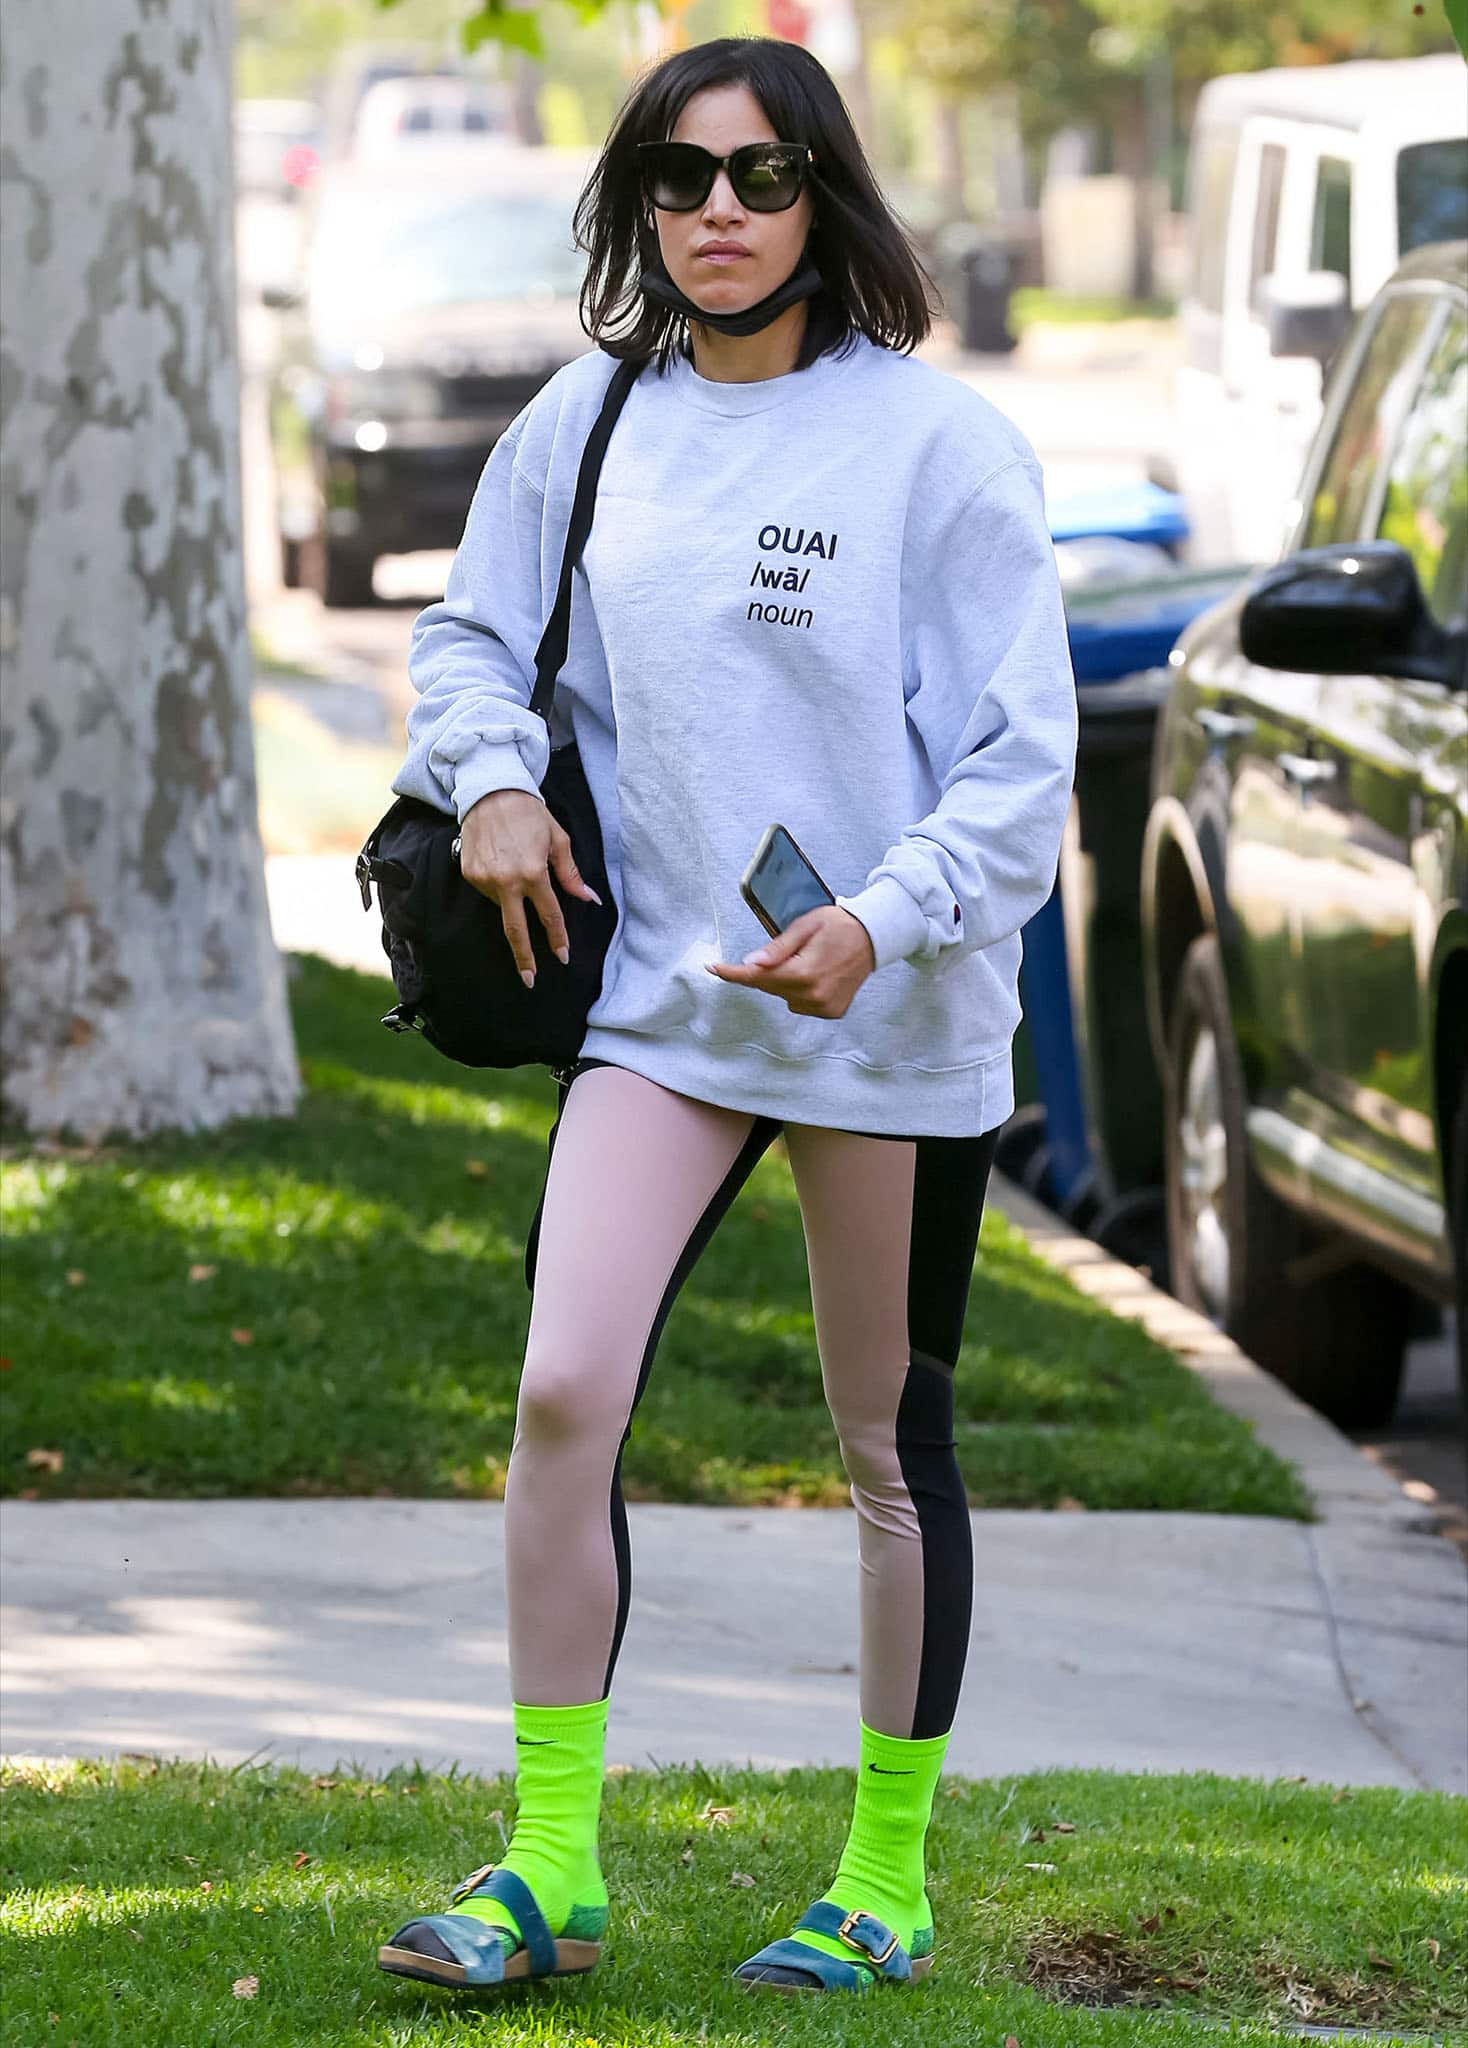 Sofia Boutella works out in a gray sweater with two-tone leggings and neon green socks on May 5, 2021